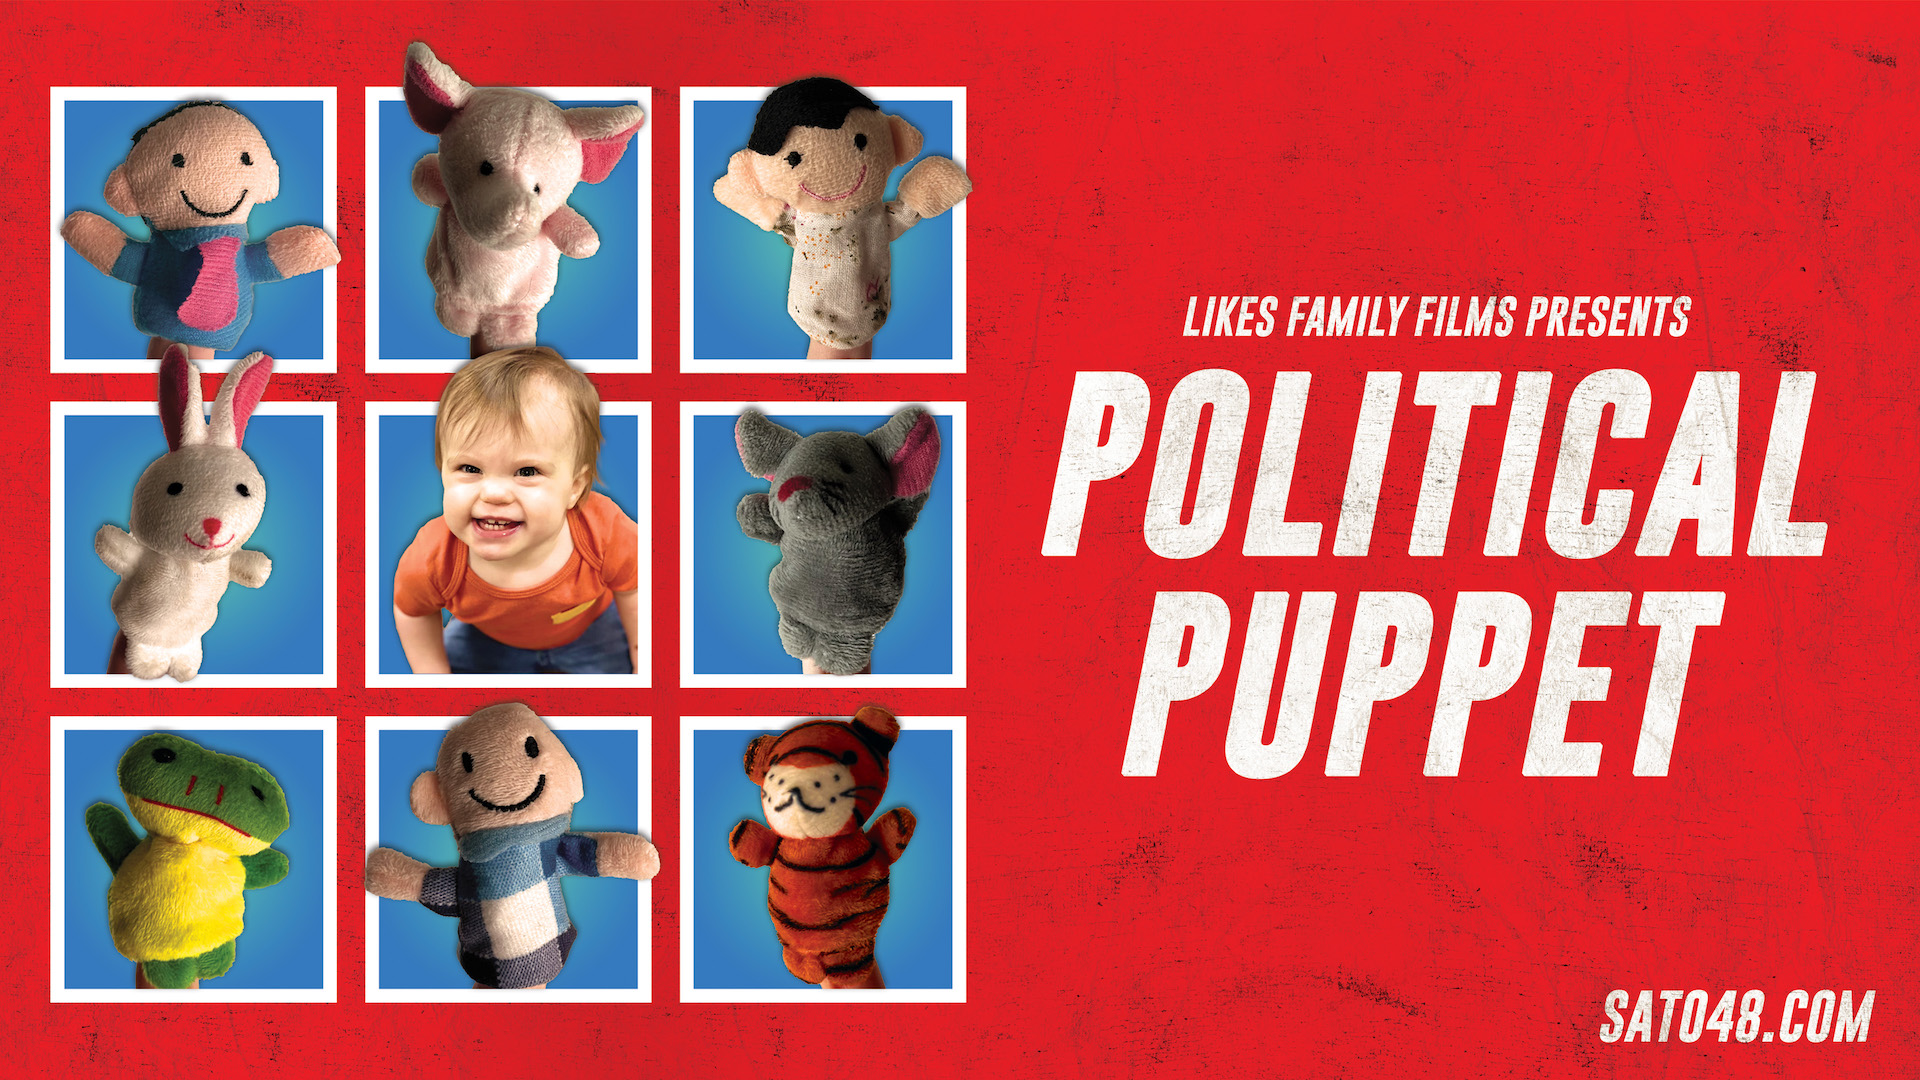 Featured image for “Political Puppet | A Likes Family Film”